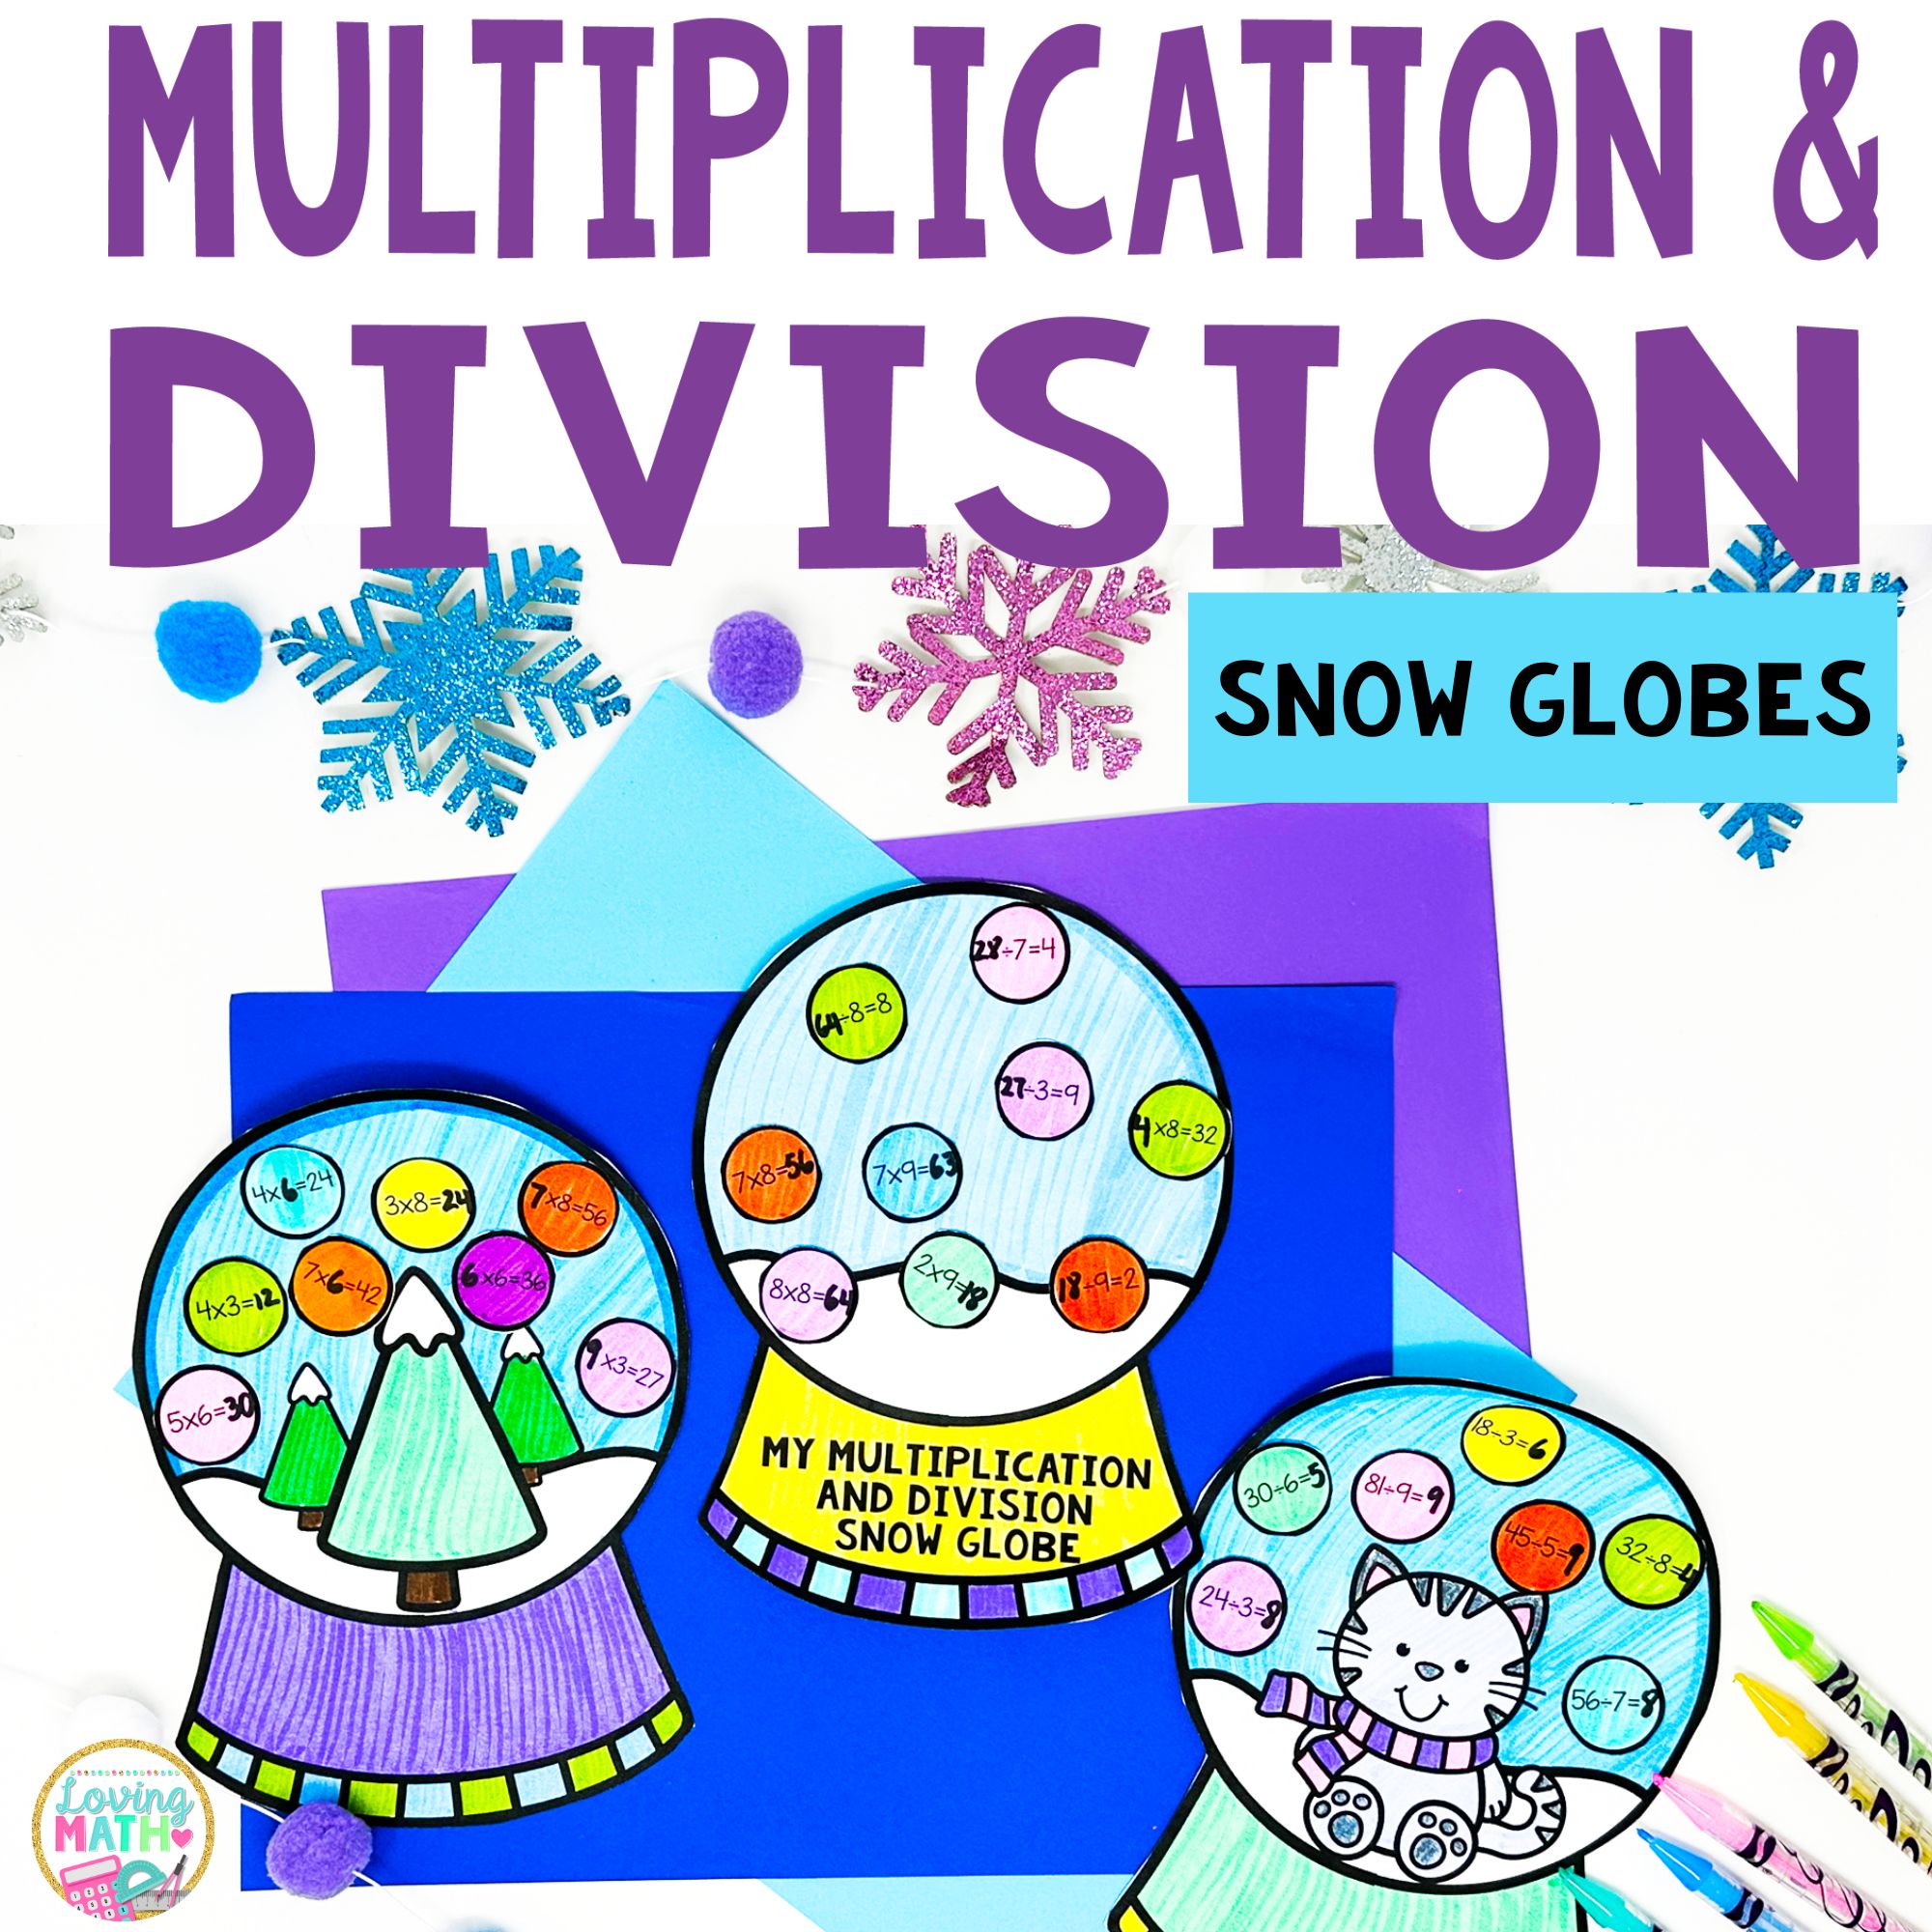 multiplication-and-division-facts-craft-loving-math